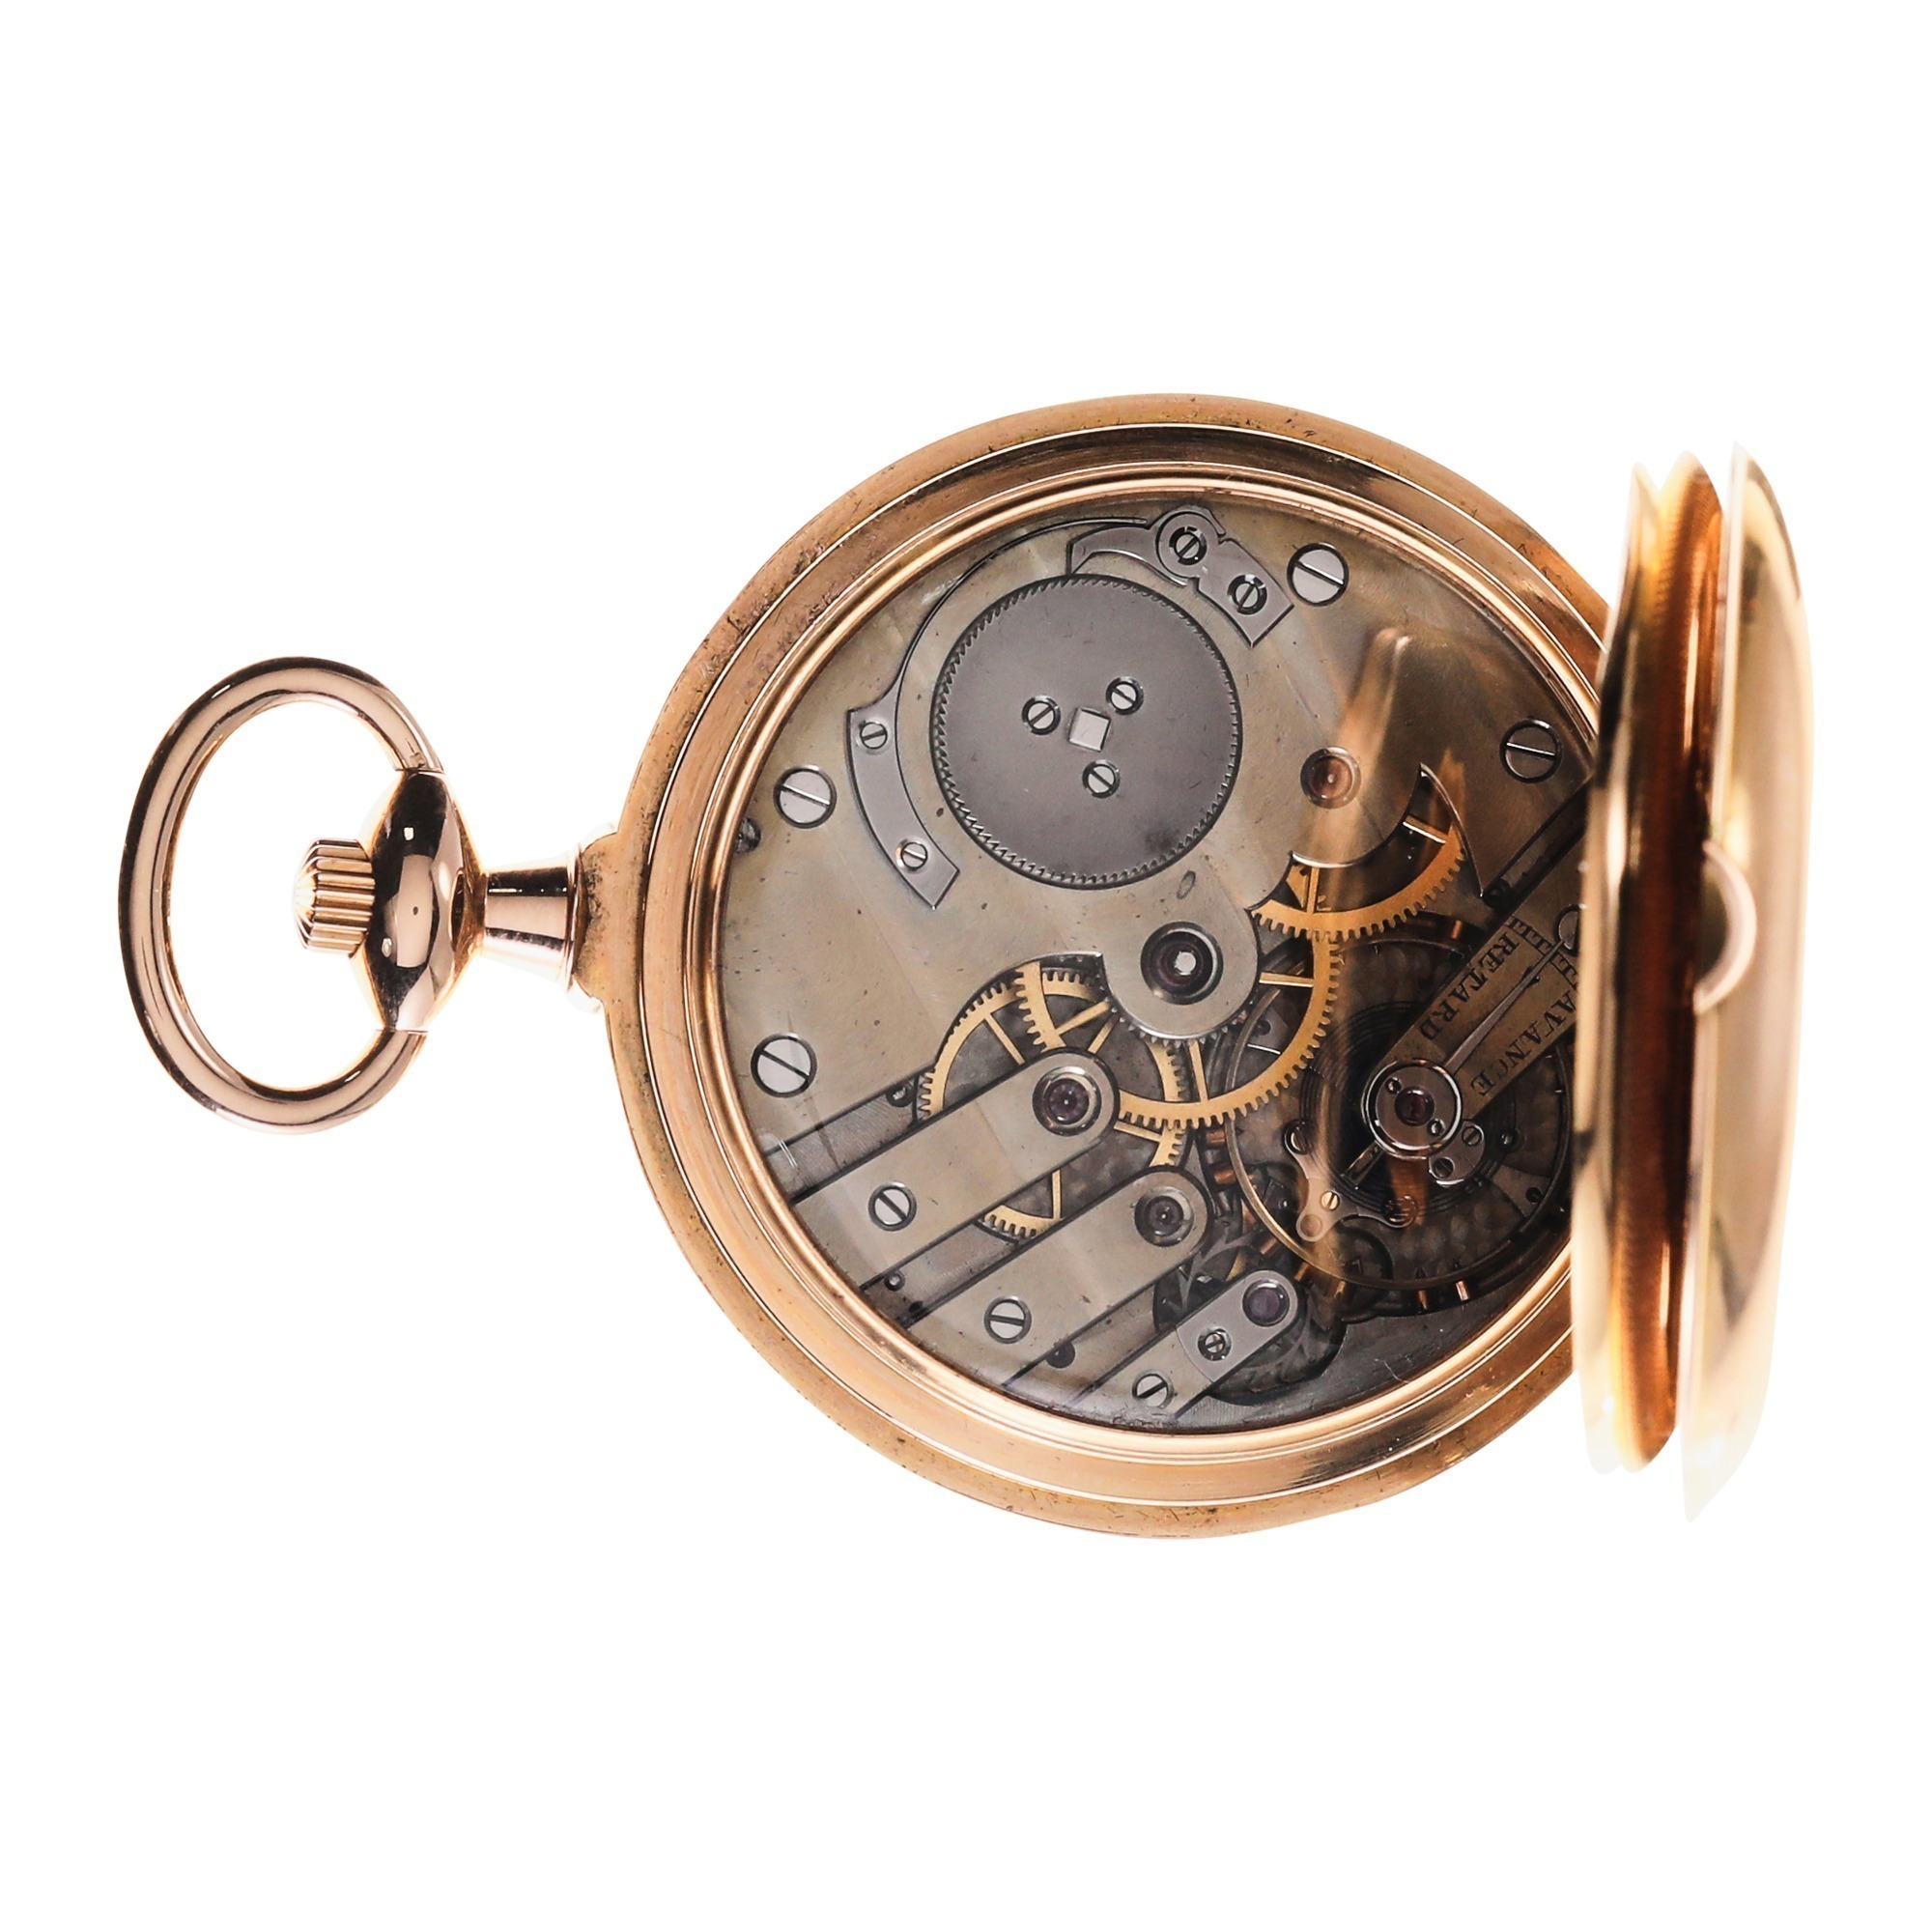 B. Haas 18k Gold Cover Winding Hunting Case Pocket Watch - 3